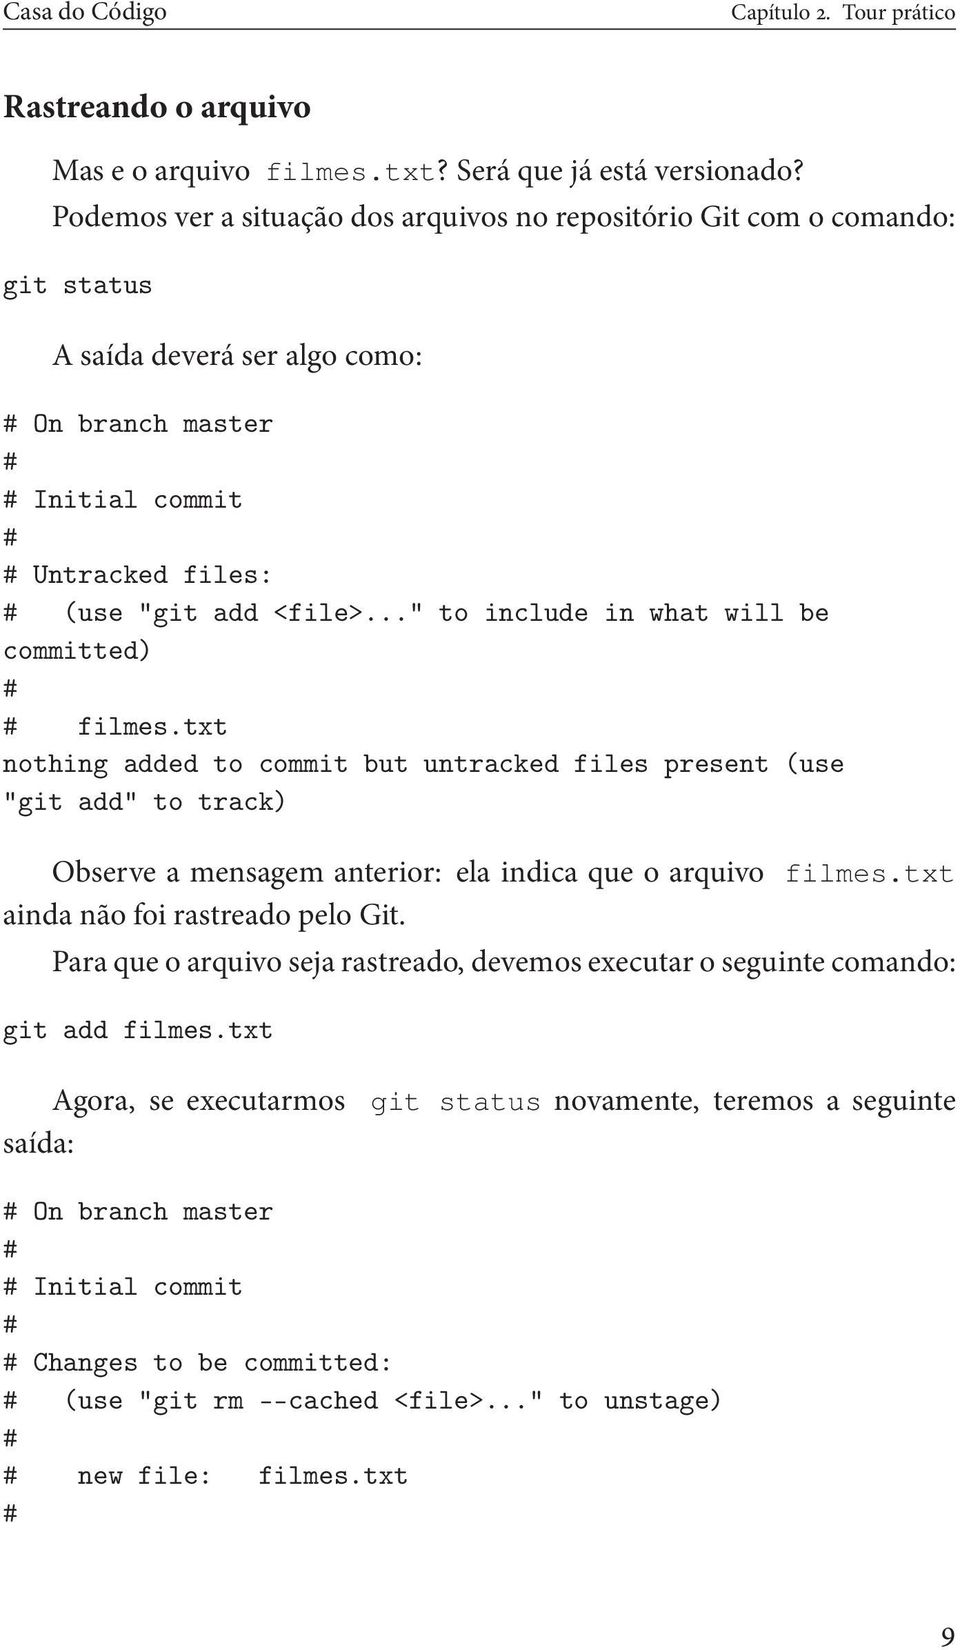 .." to include in what will be committed) # # filmes.txt nothing added to commit but untracked files present (use "git add" to track) Observeamensagemanterior:elaindicaqueoarquivo filmes.